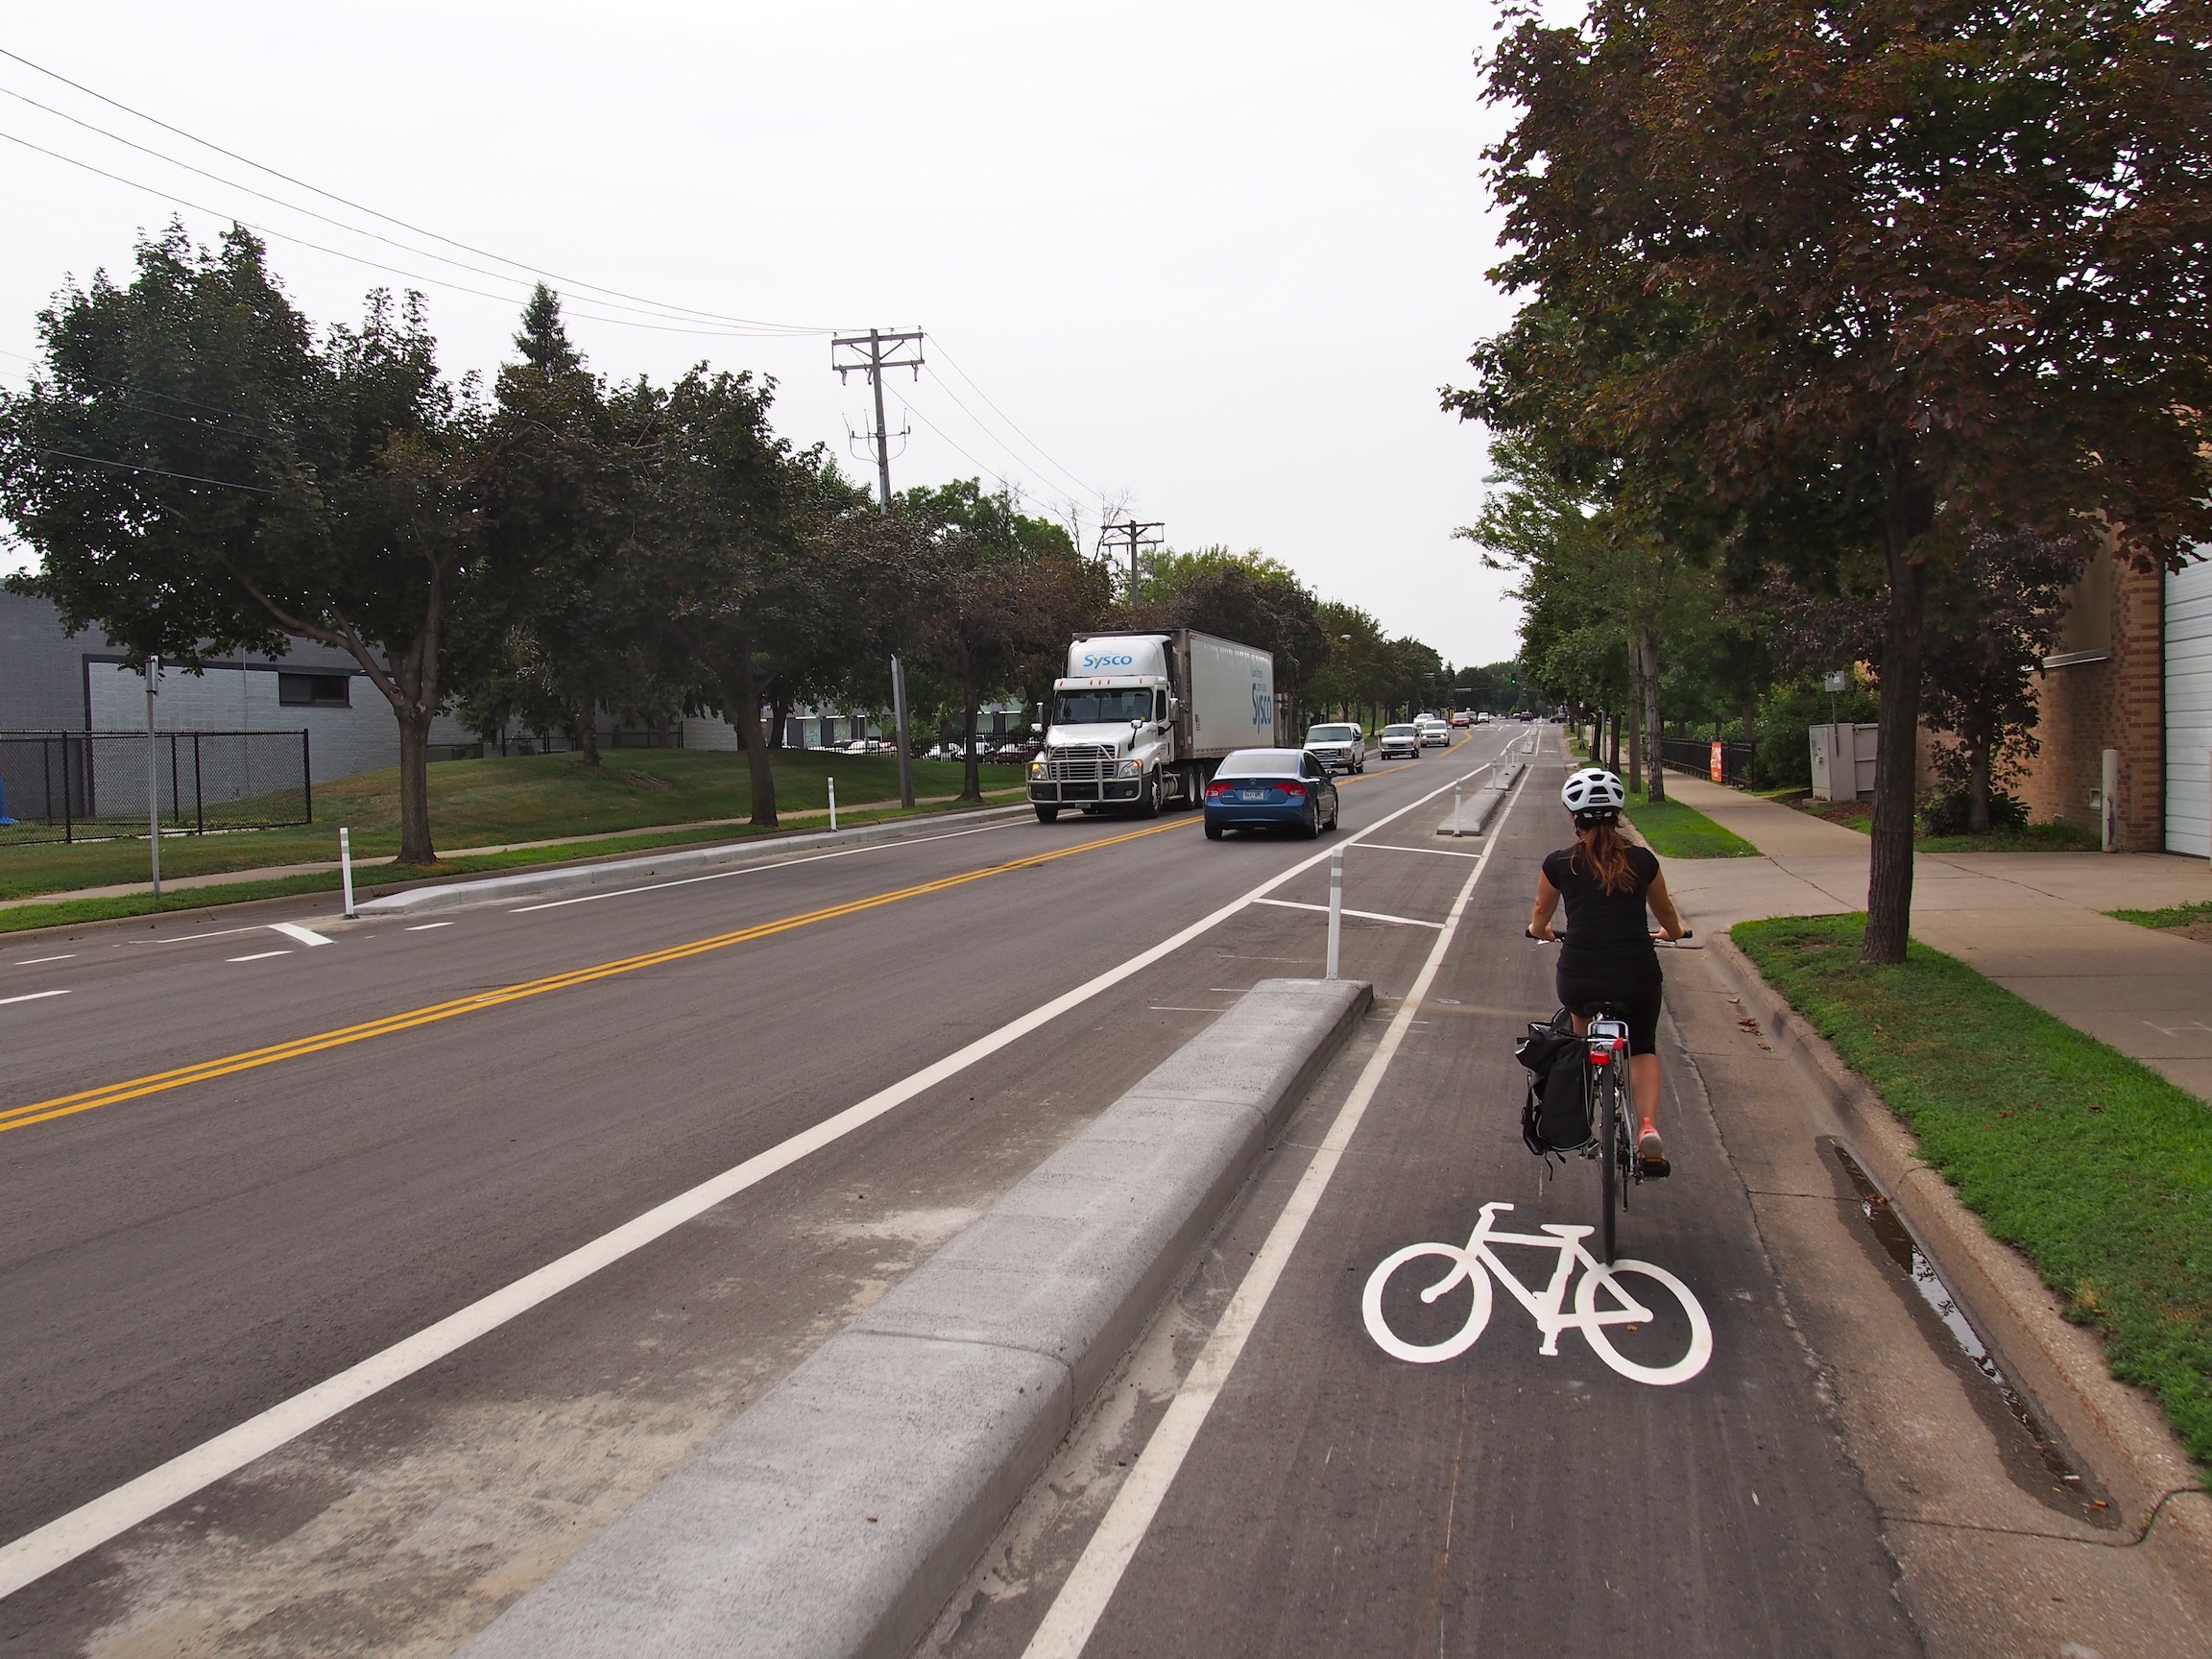 Curb separated bike lane presents temporary parking in lane